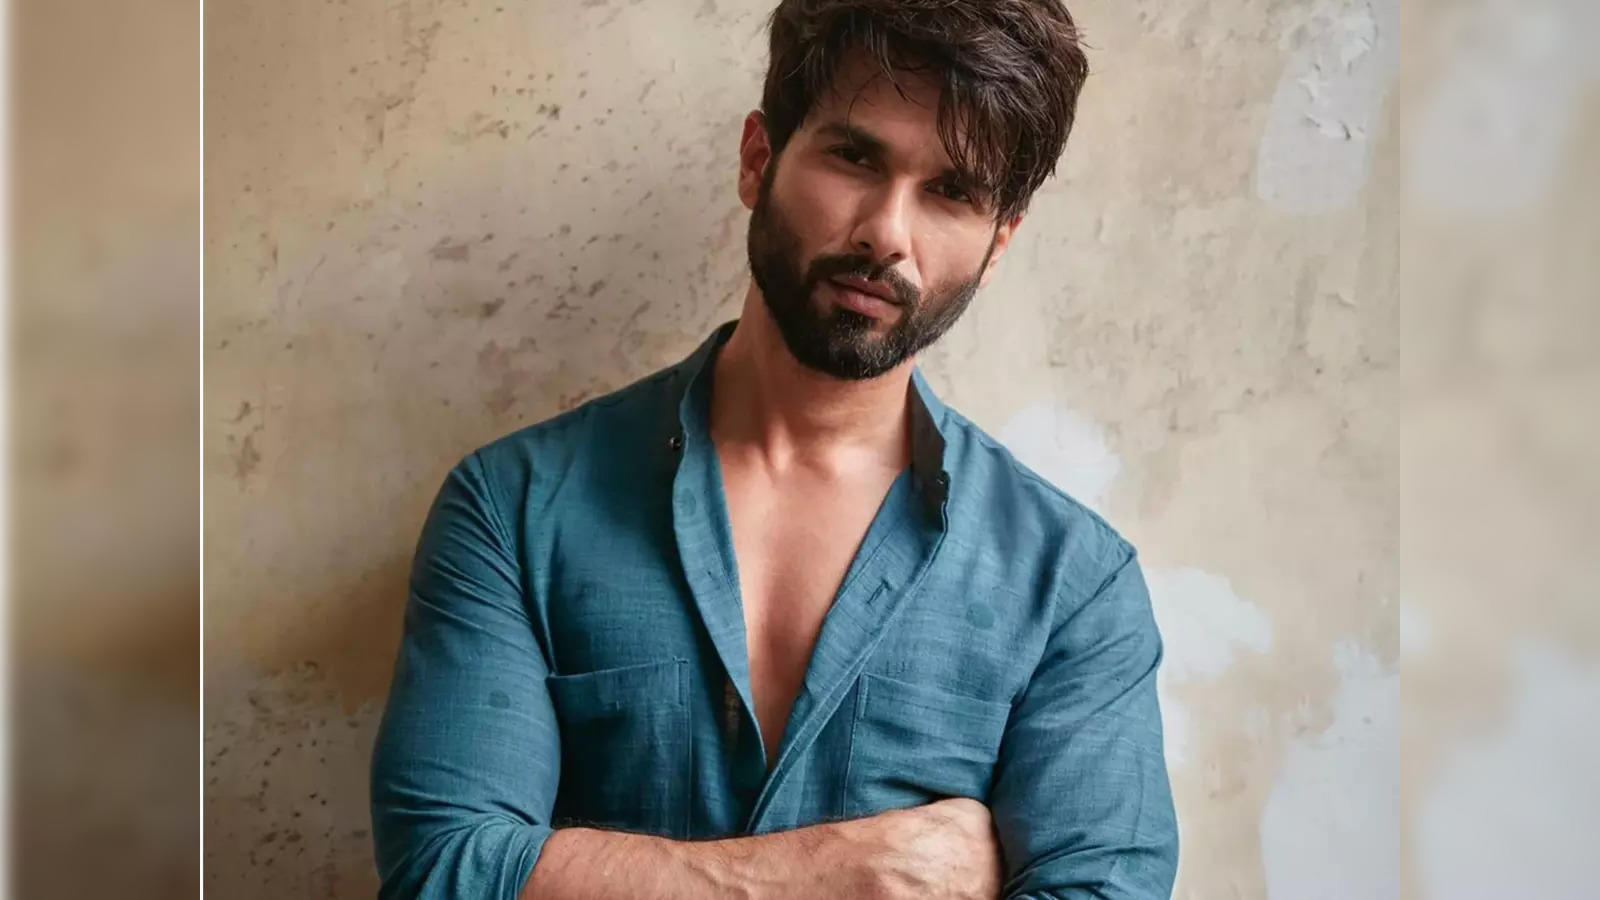 Shahid Kapoor to lose bachelorhood, single status in a day